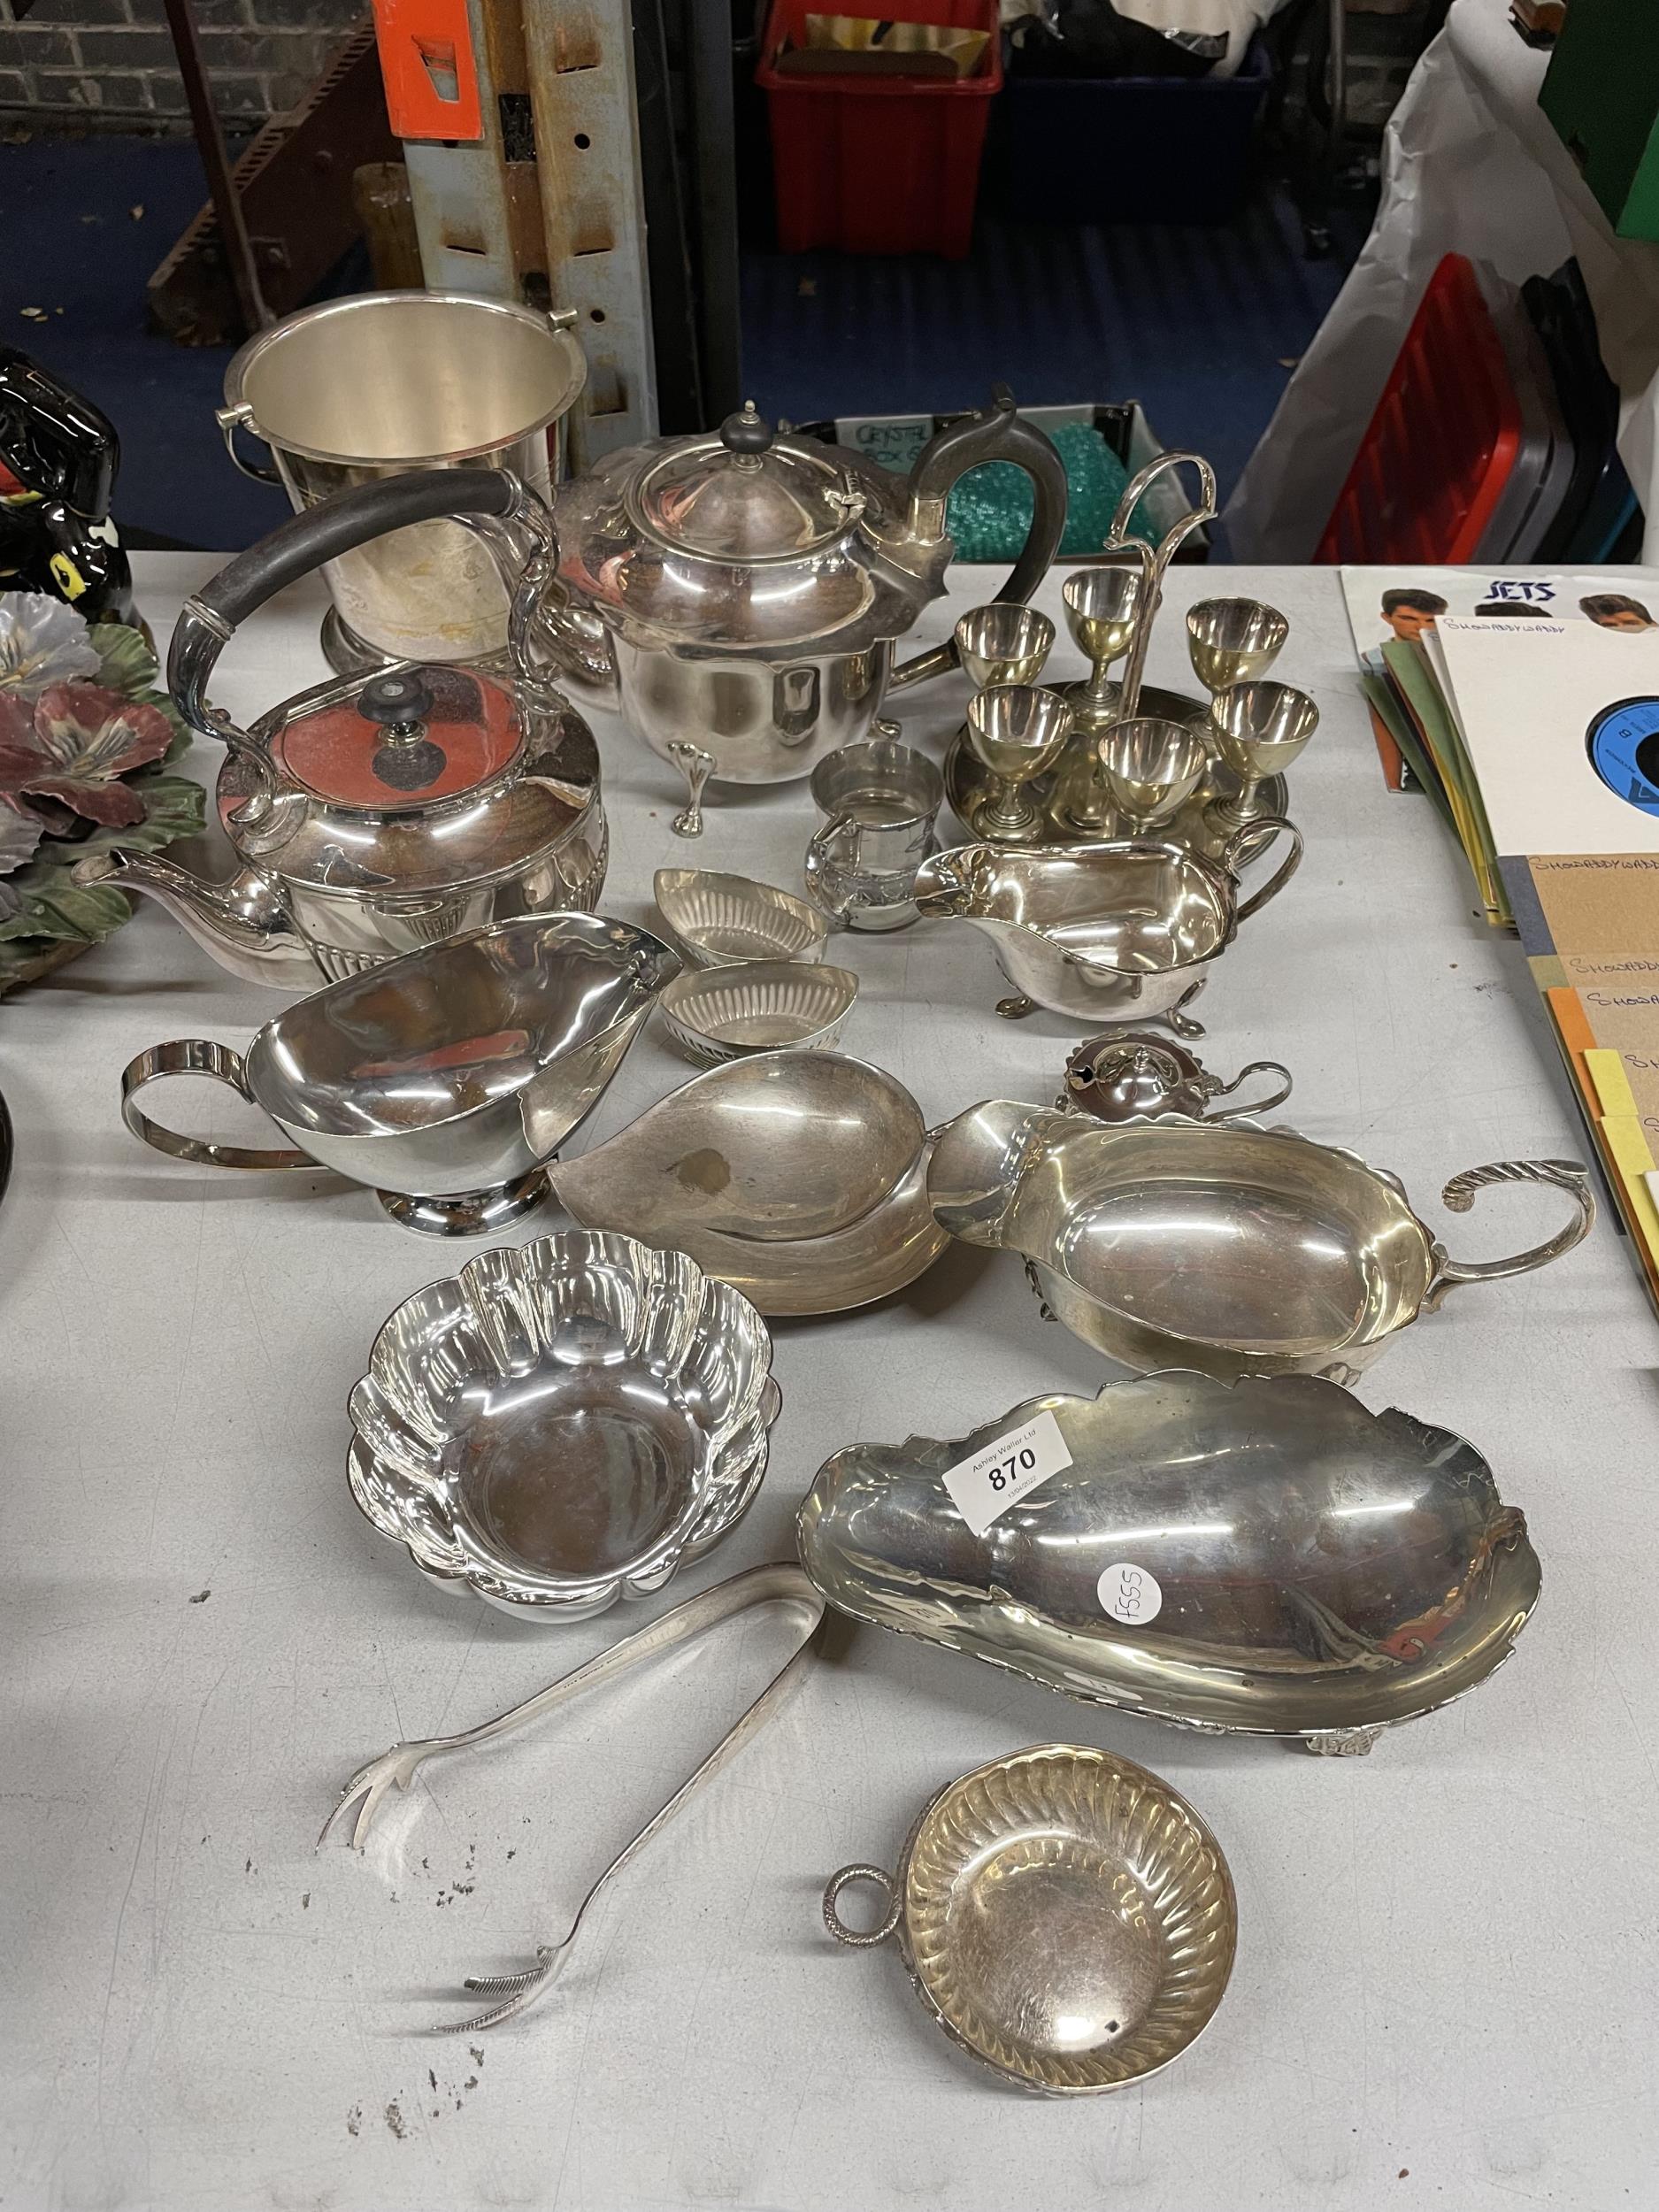 A COLLECTION OF SILVER PLATED ITEMS TO INCLUDE TEAPOTS, SAUCEBOATS, BOWLS, ICE BUCKET, ETC